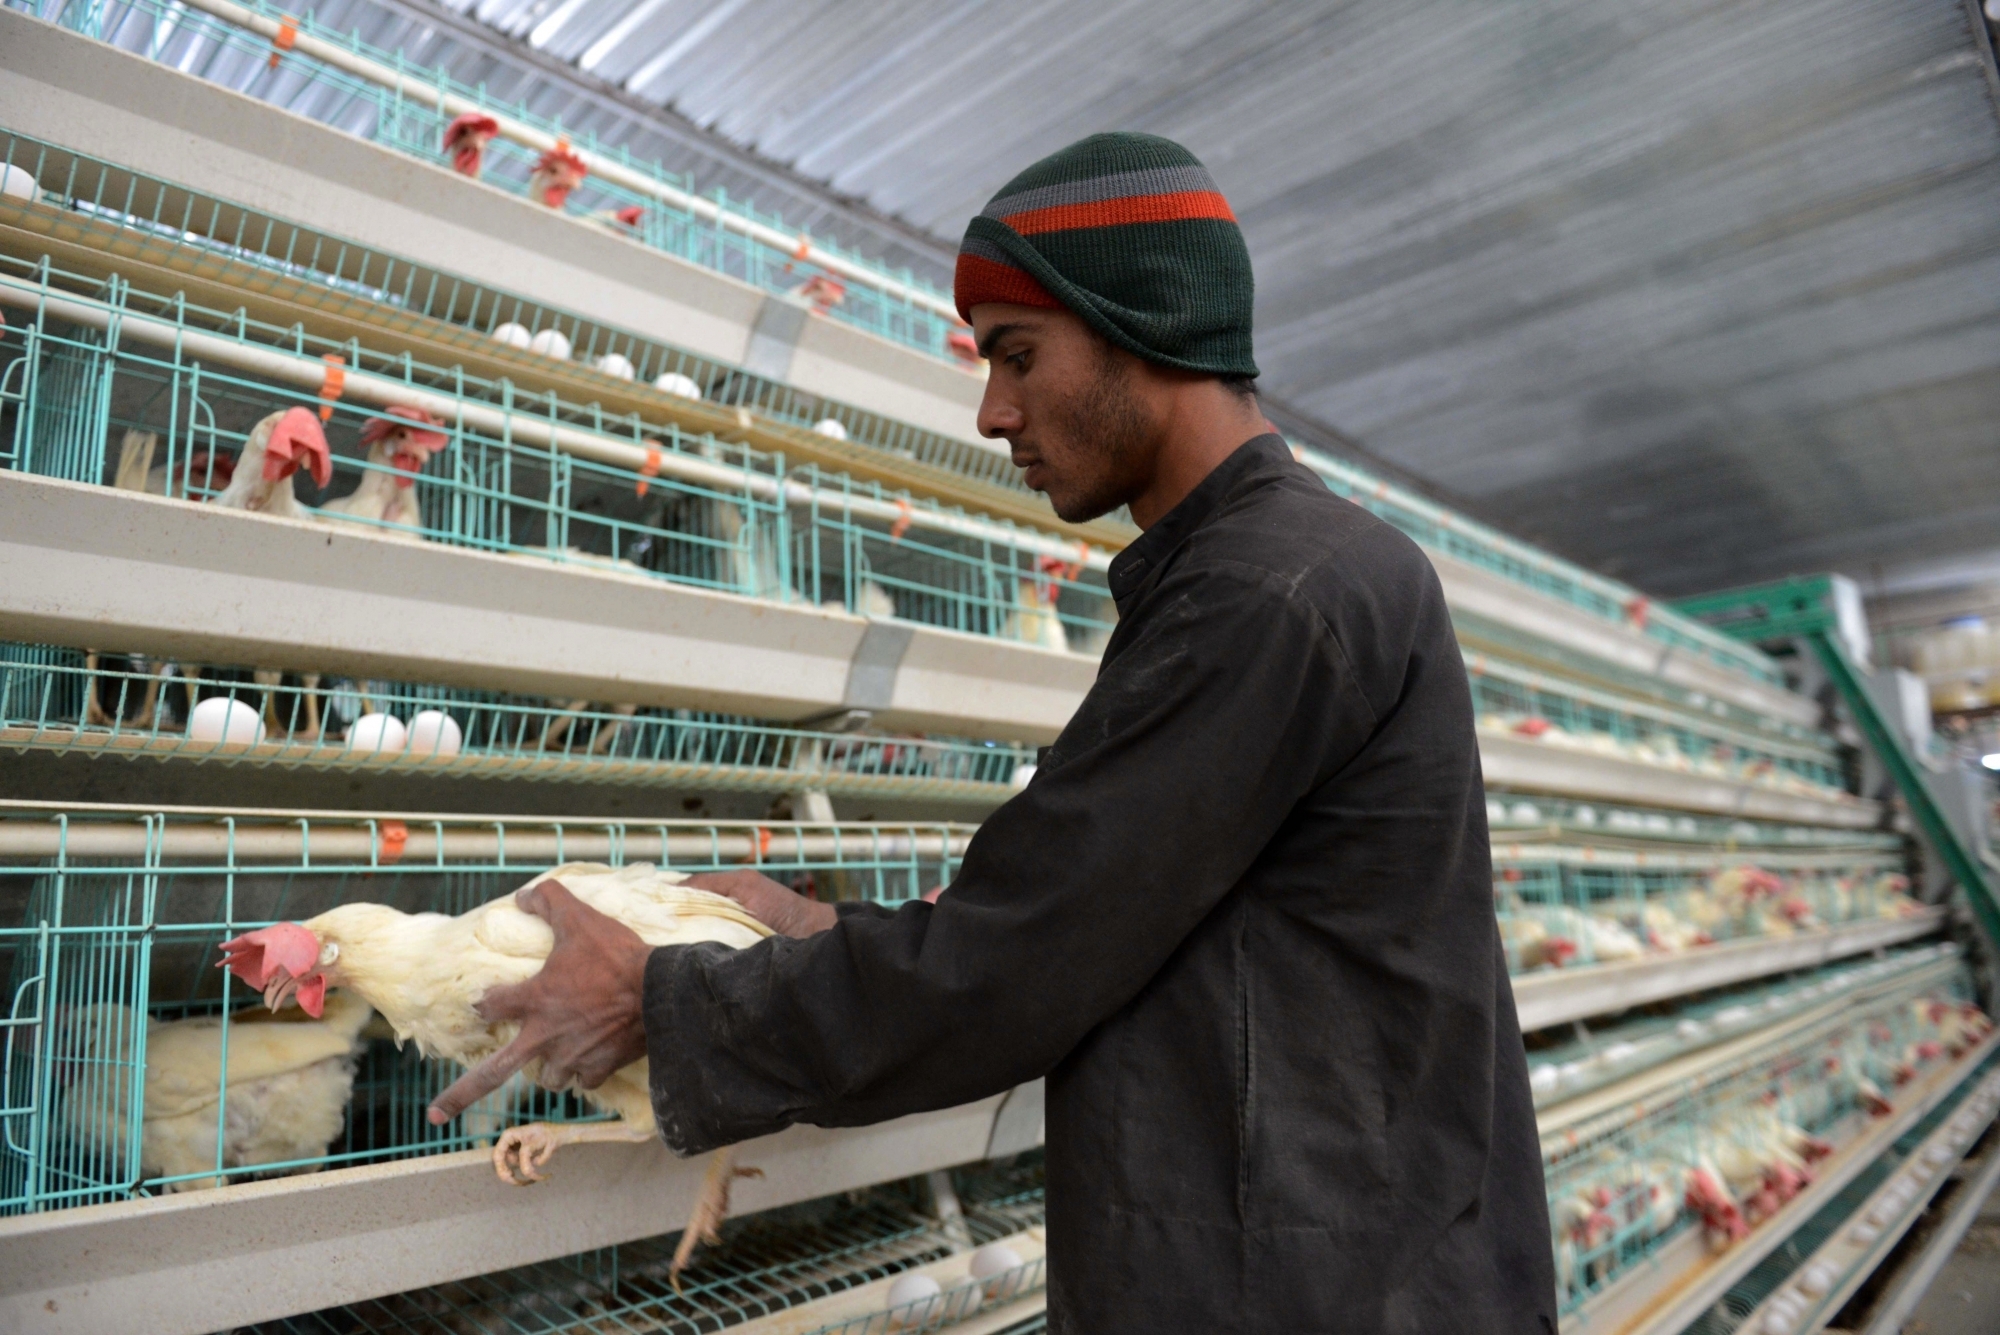 J&K aims to uplift poultry sector with insurance cover for farms